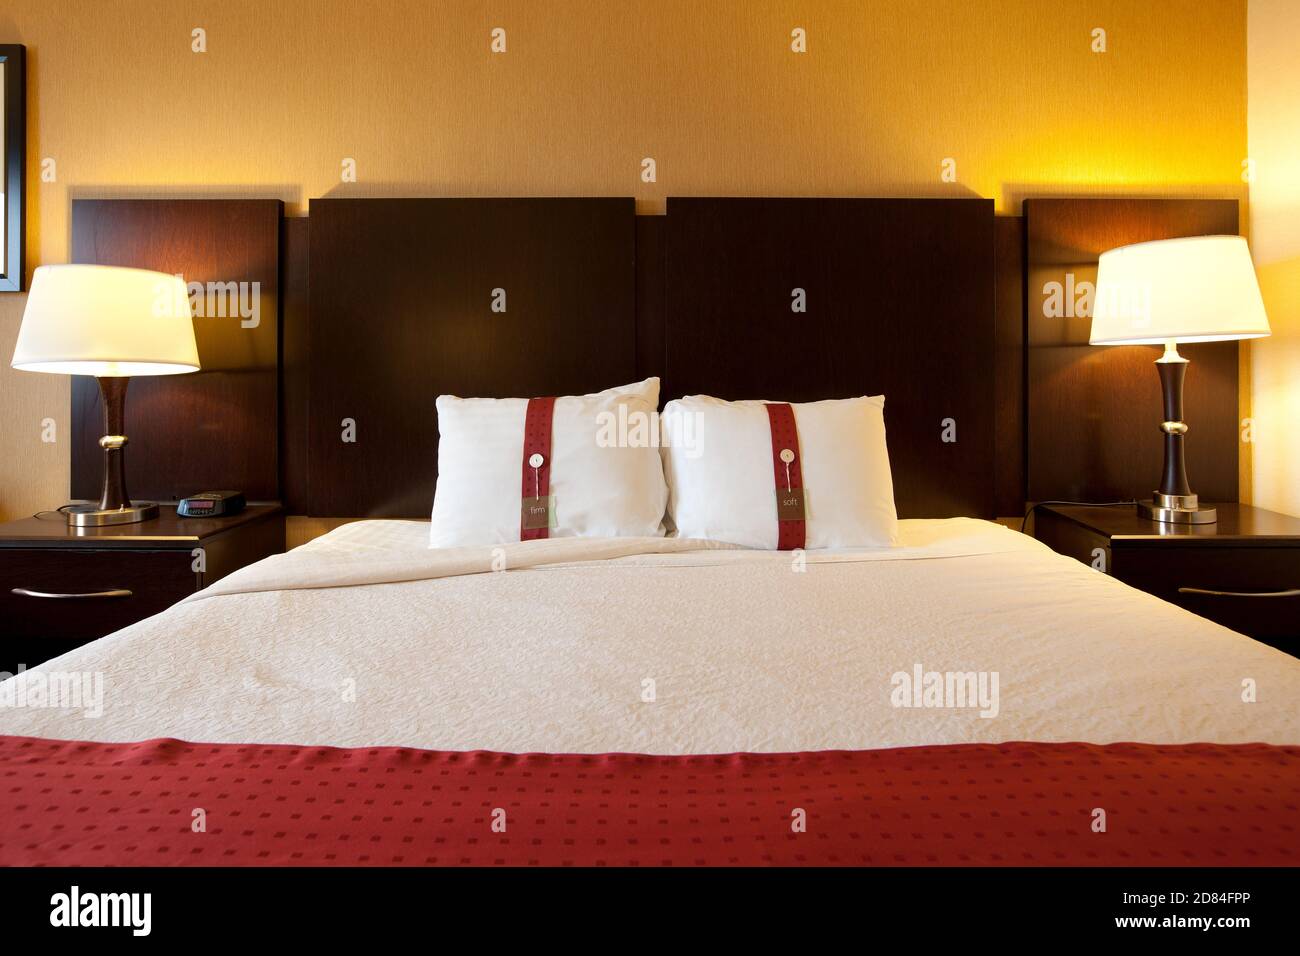 King size bed in an hotel room Stock Photo - Alamy